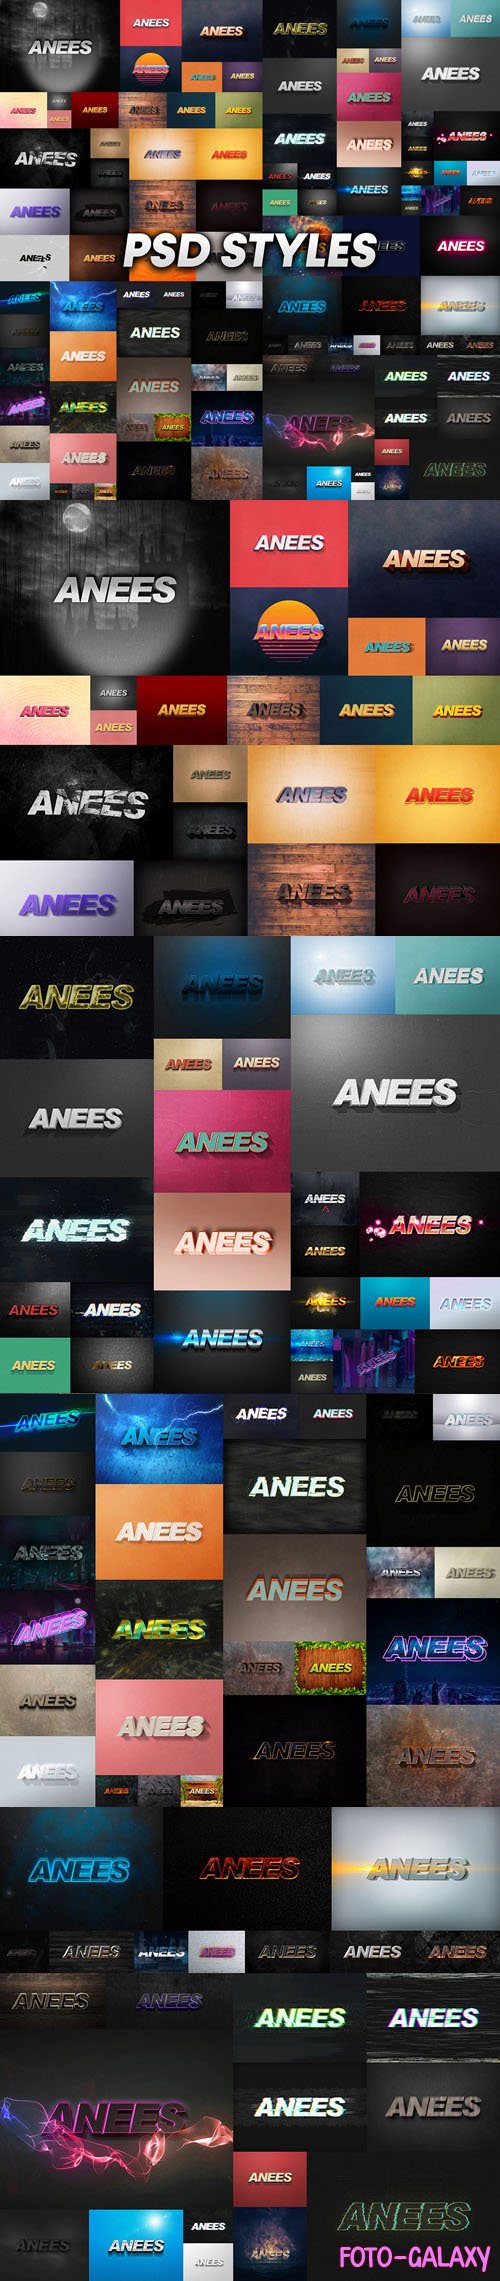 100+ Text Effects Bundle for Photoshop